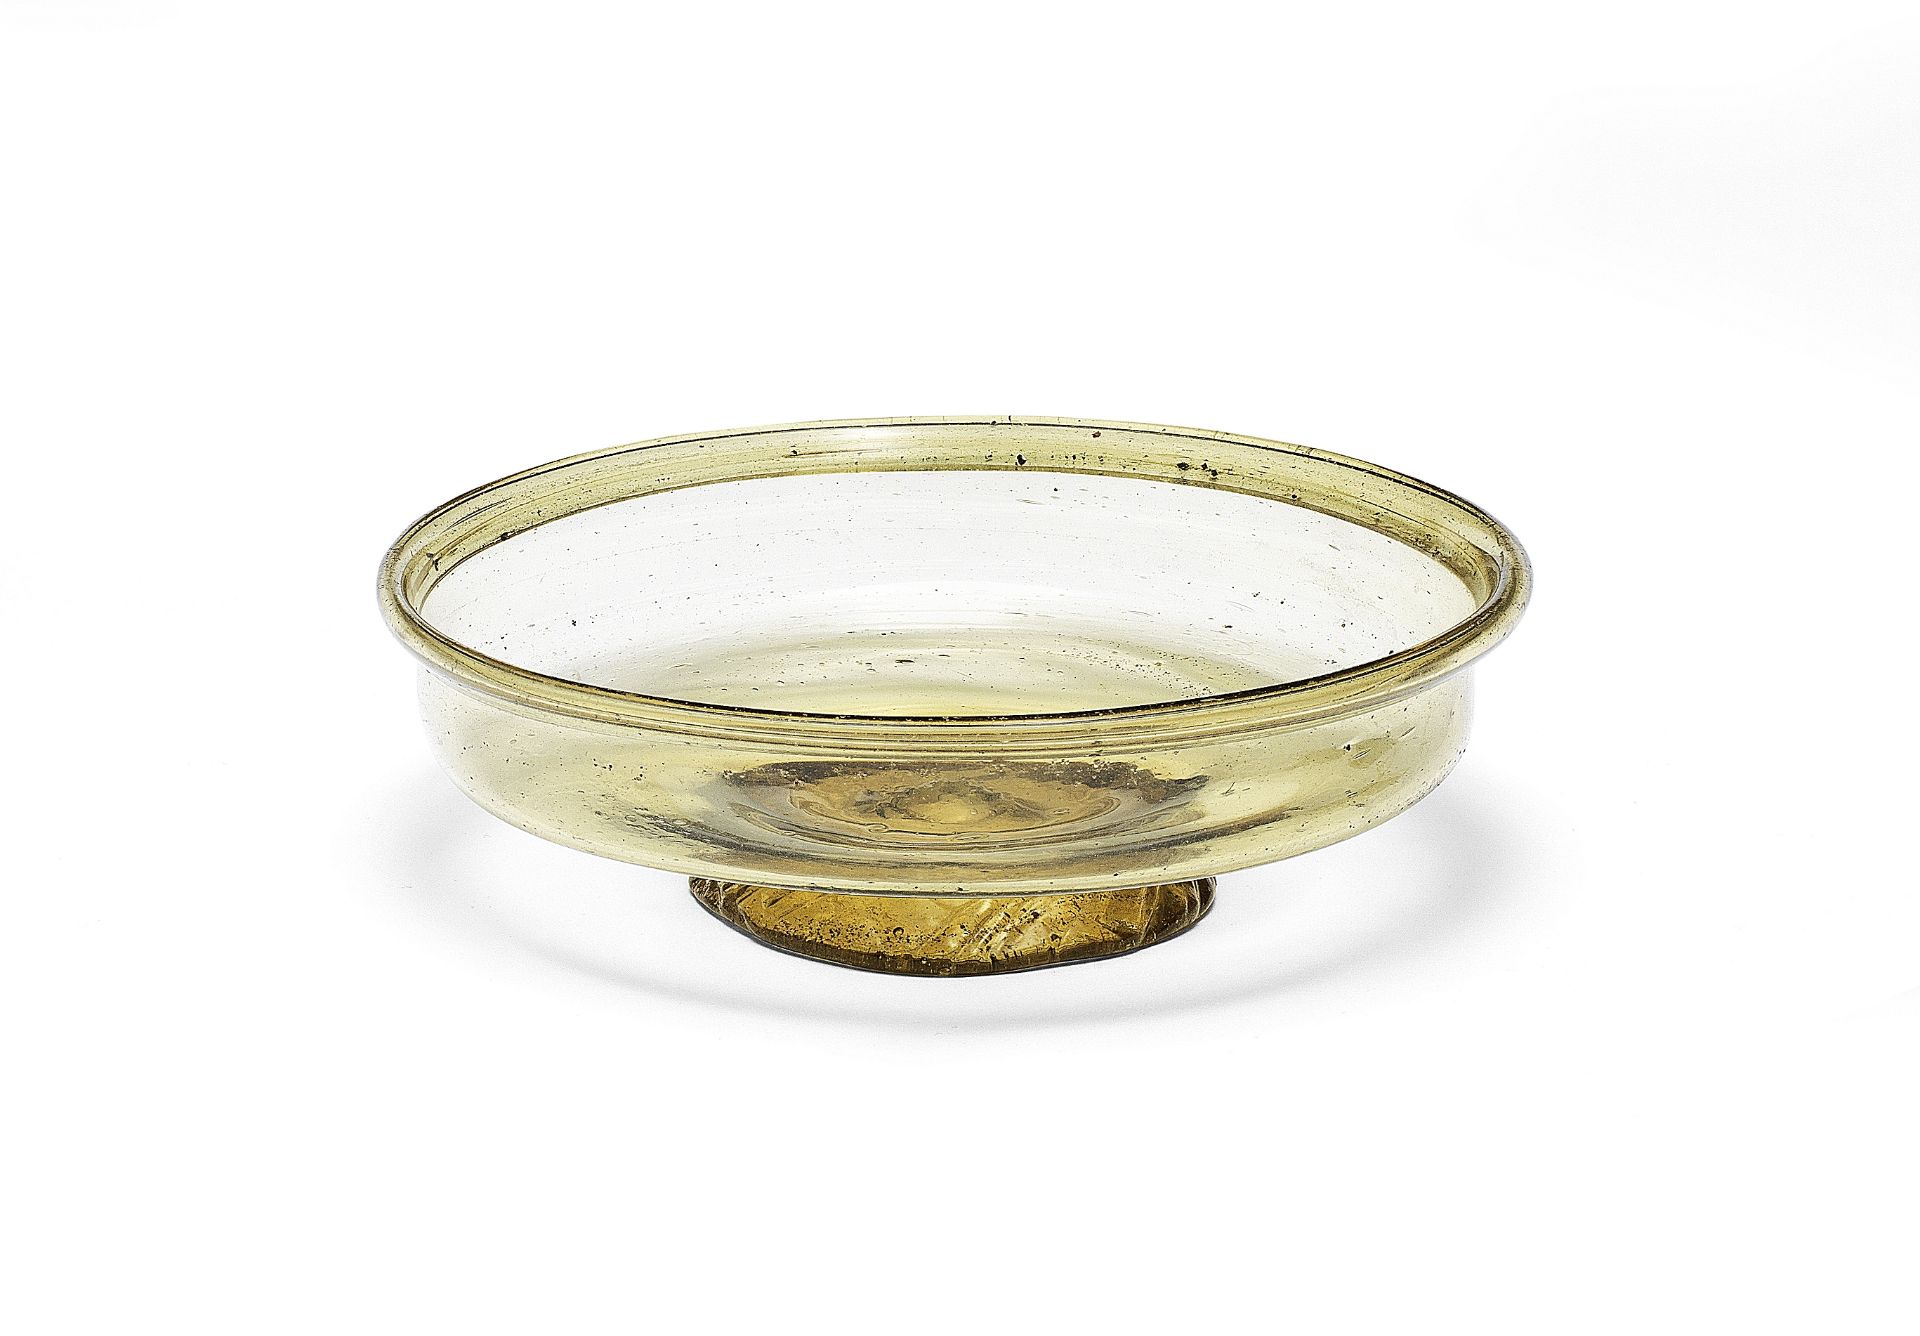 A Roman glass footed bowl